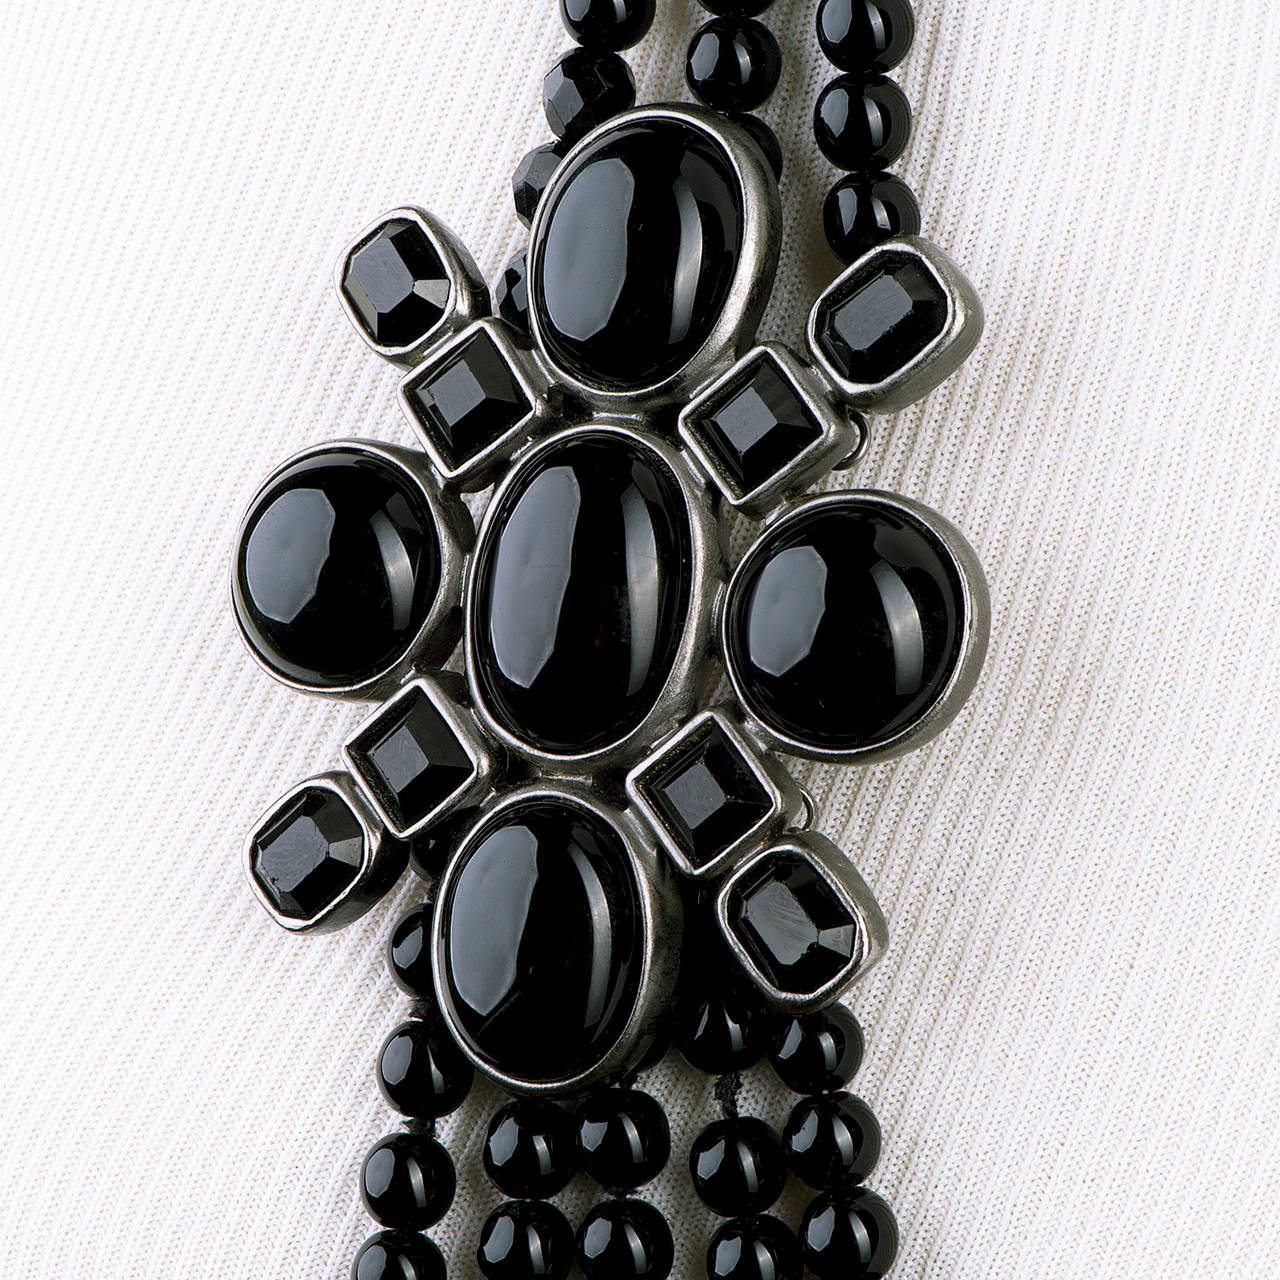 A Tres, Tres Chic Chanel Sautior, Necklace, made in circa 2005, consisting of five graduated rings of Black Glass Onyx Pearls, centred with a gorgeous silver pendant, inset with cabochons of 'Pate de Verre' Black Onyx. This stunning piece is Signed